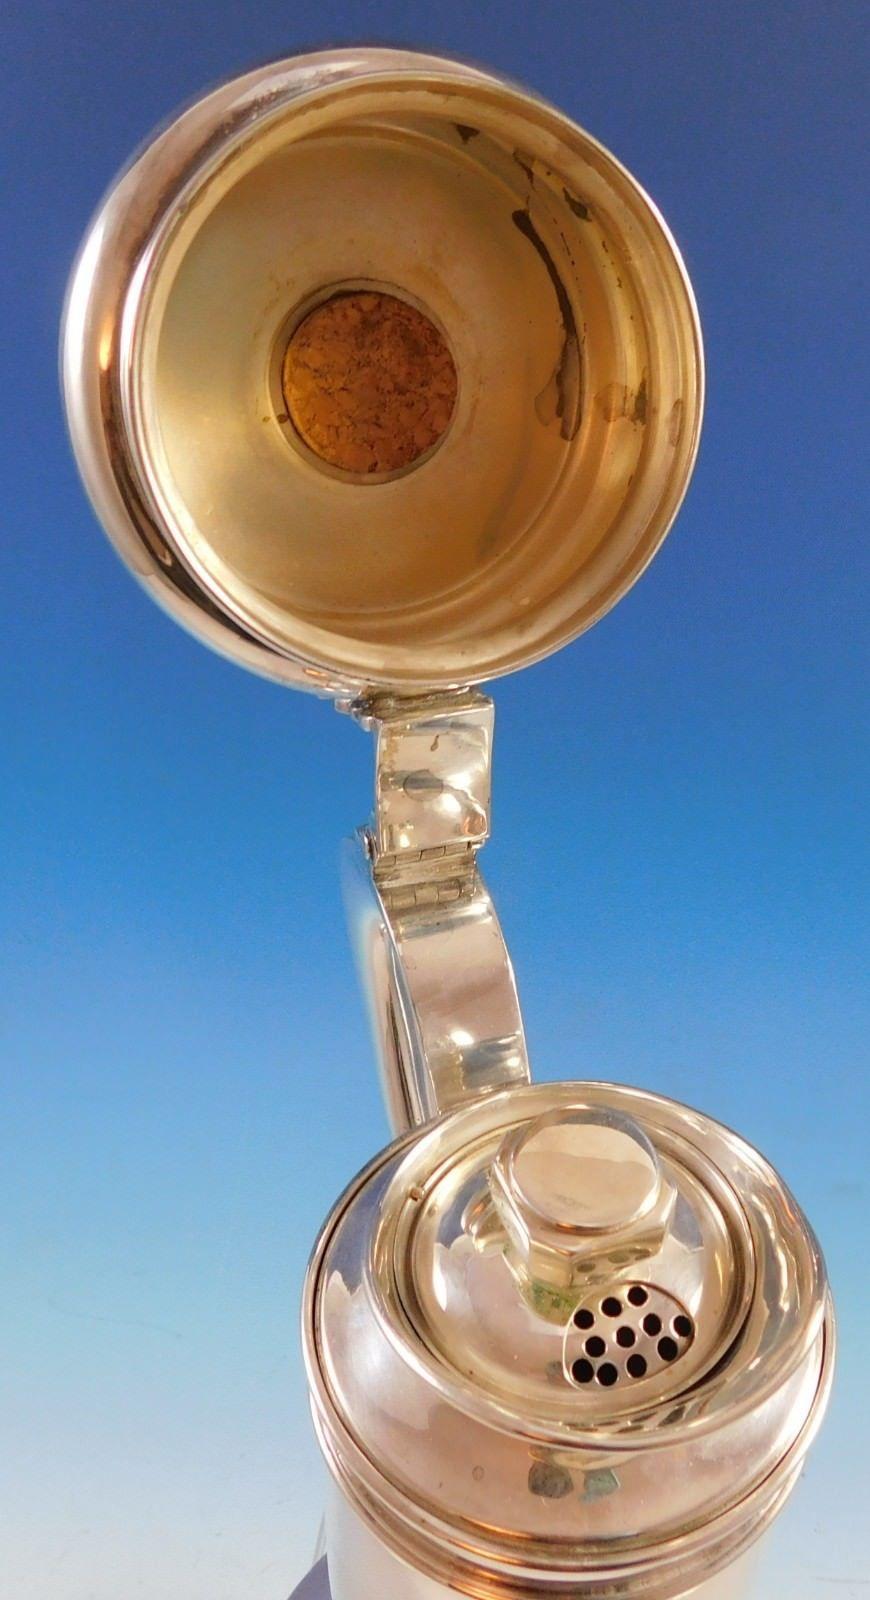 U. Vitali
Sterling silver martini Shaker handmade by Ubaldo Vitali. This martini pitcher measures 11 tall x 6 1/2 diameter. This piece was a presentation for The Meadowlands World Cup horse race on June 14, 1984. It is in excellent condition. Truly